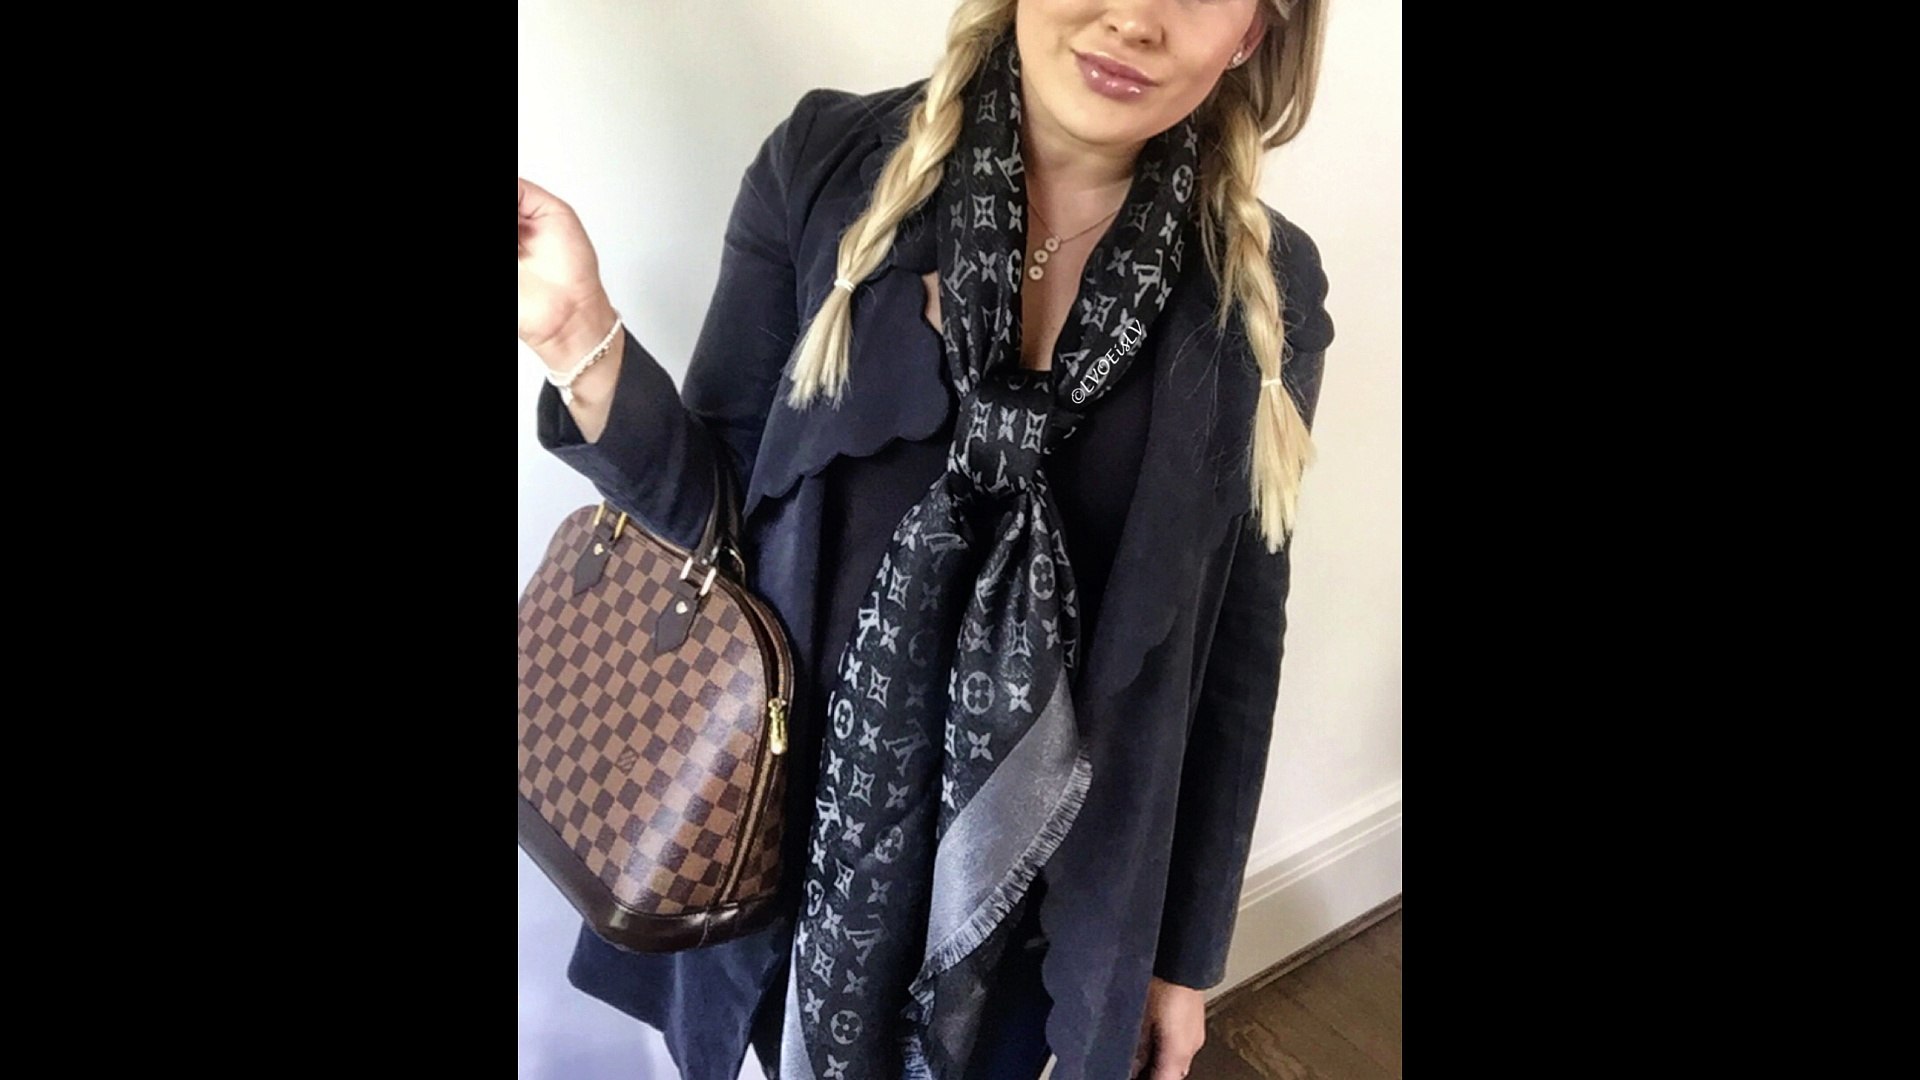 How to style a Louis Vuitton Shawl using The Aster Look - video